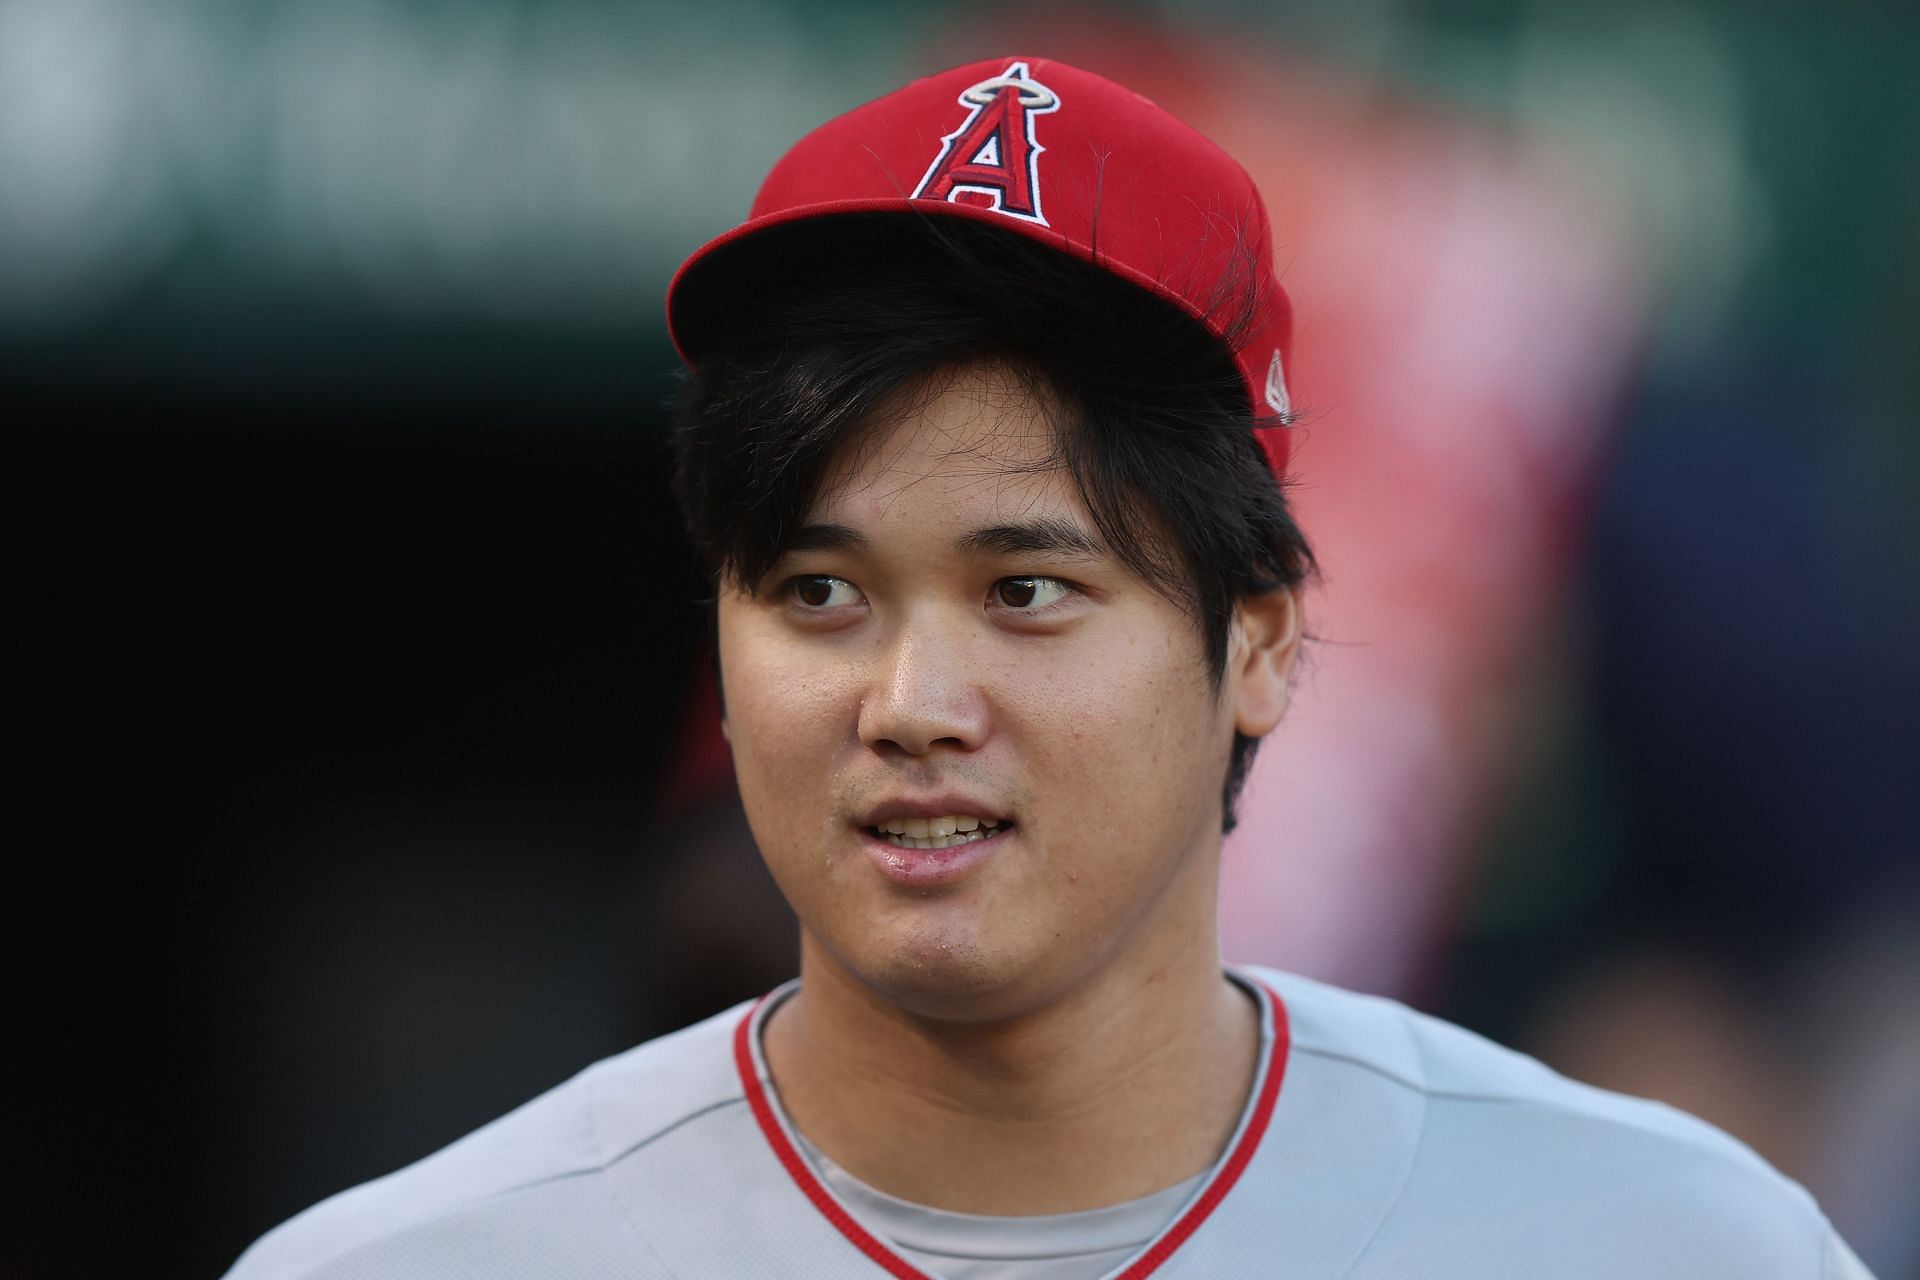 Shohei Ohtani prepares in the dugout before the game against the Oakland Athletics